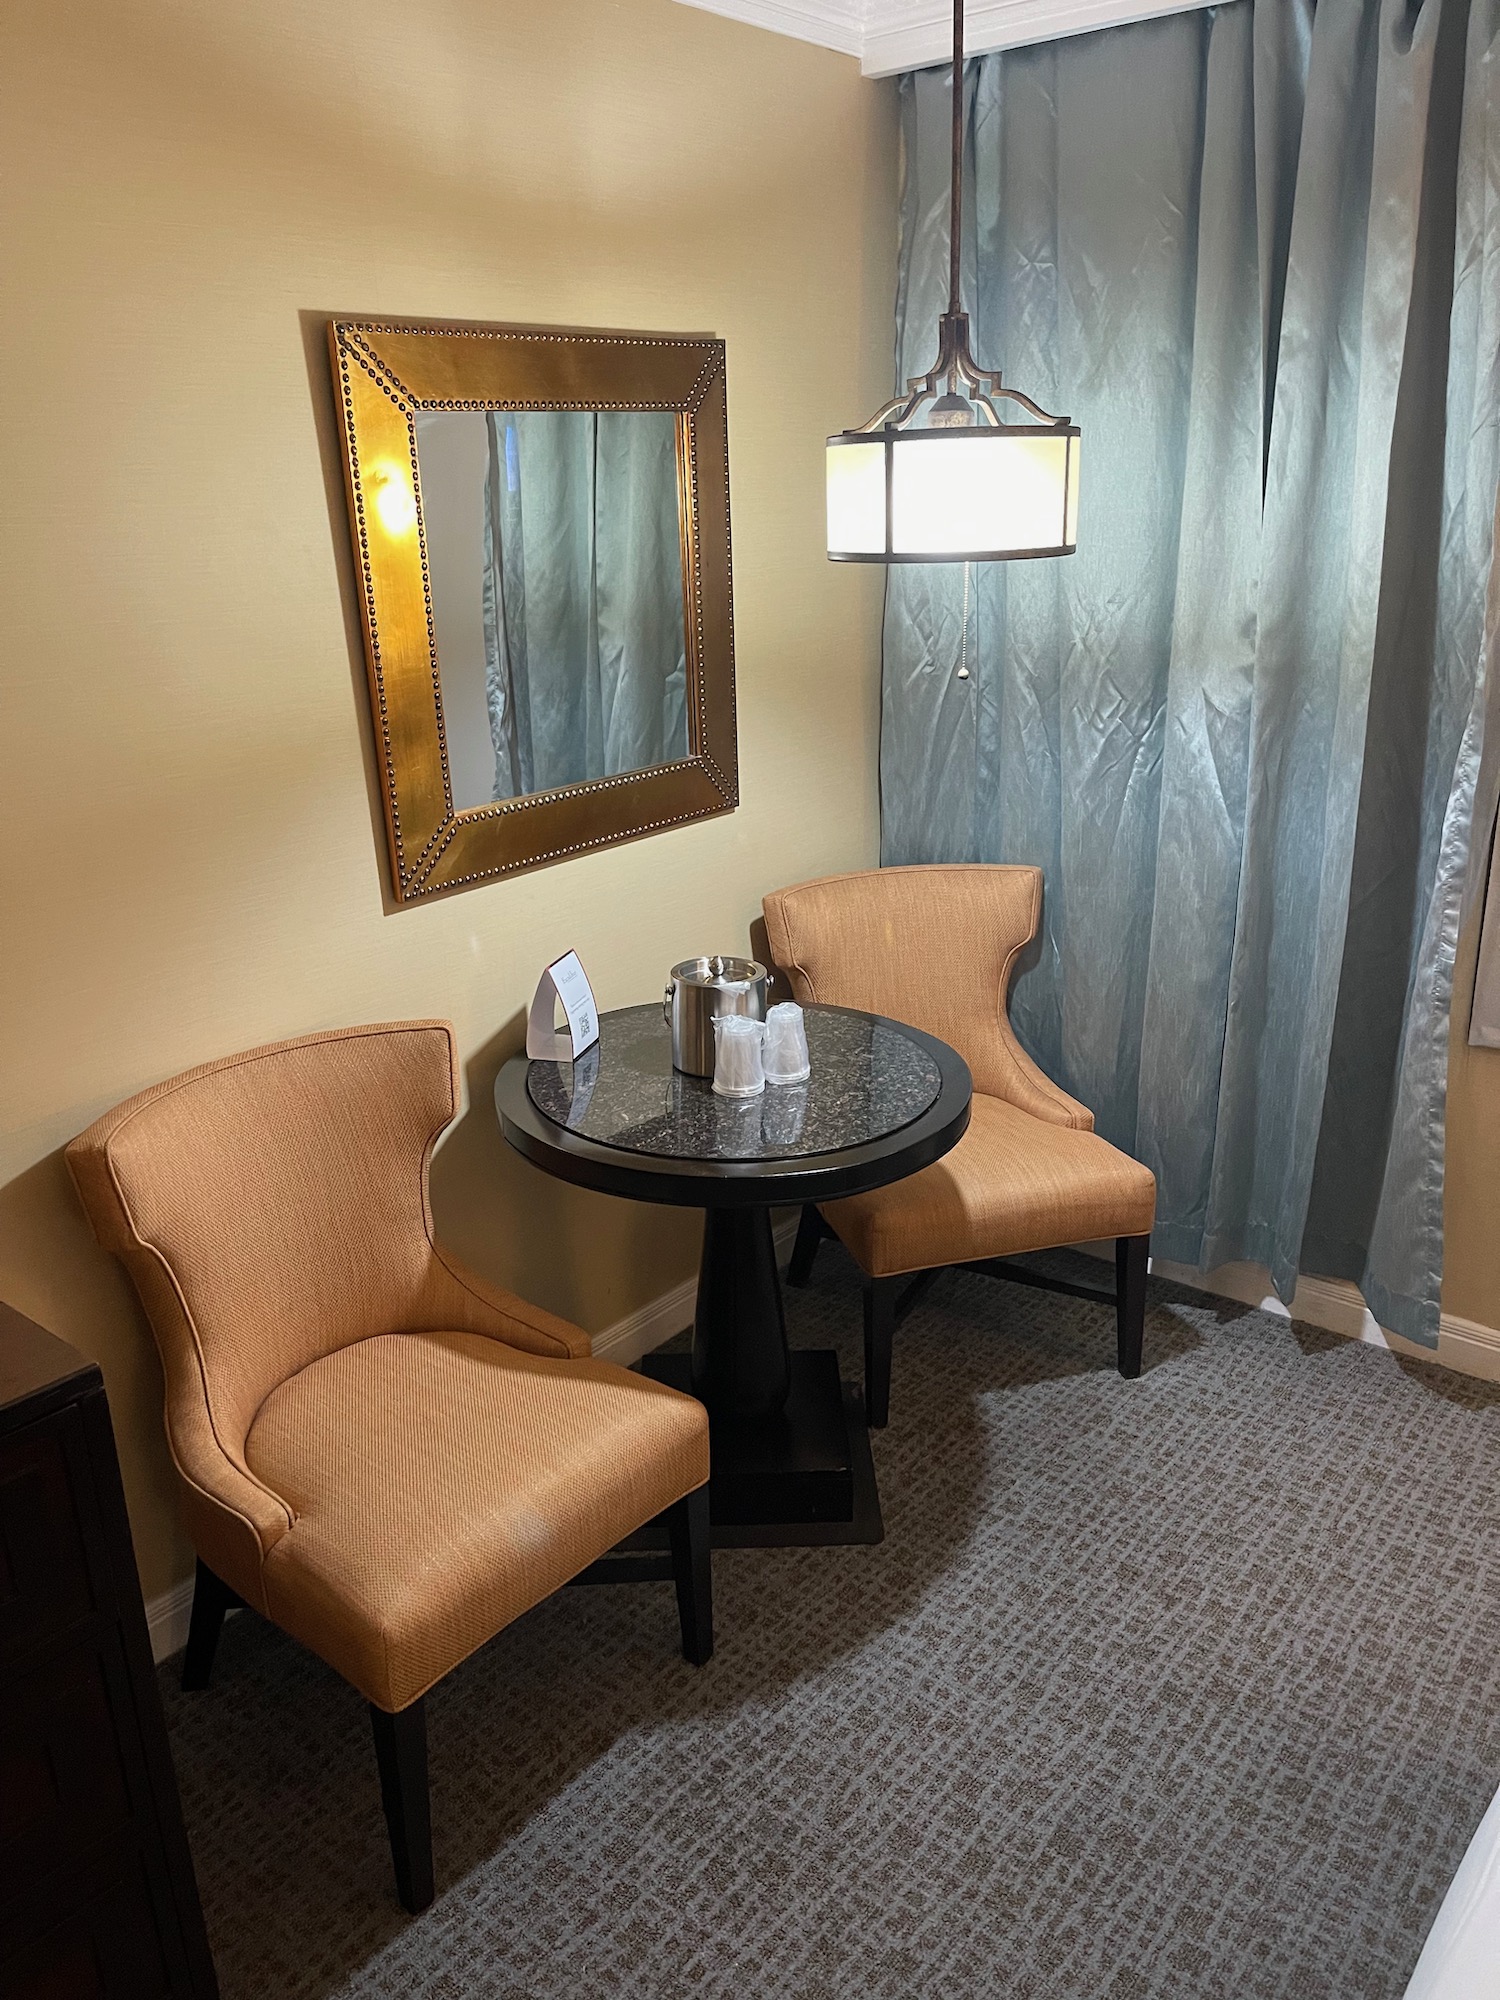 Accommodation Review – Excalibur Hotel and Casino, Las Vegas